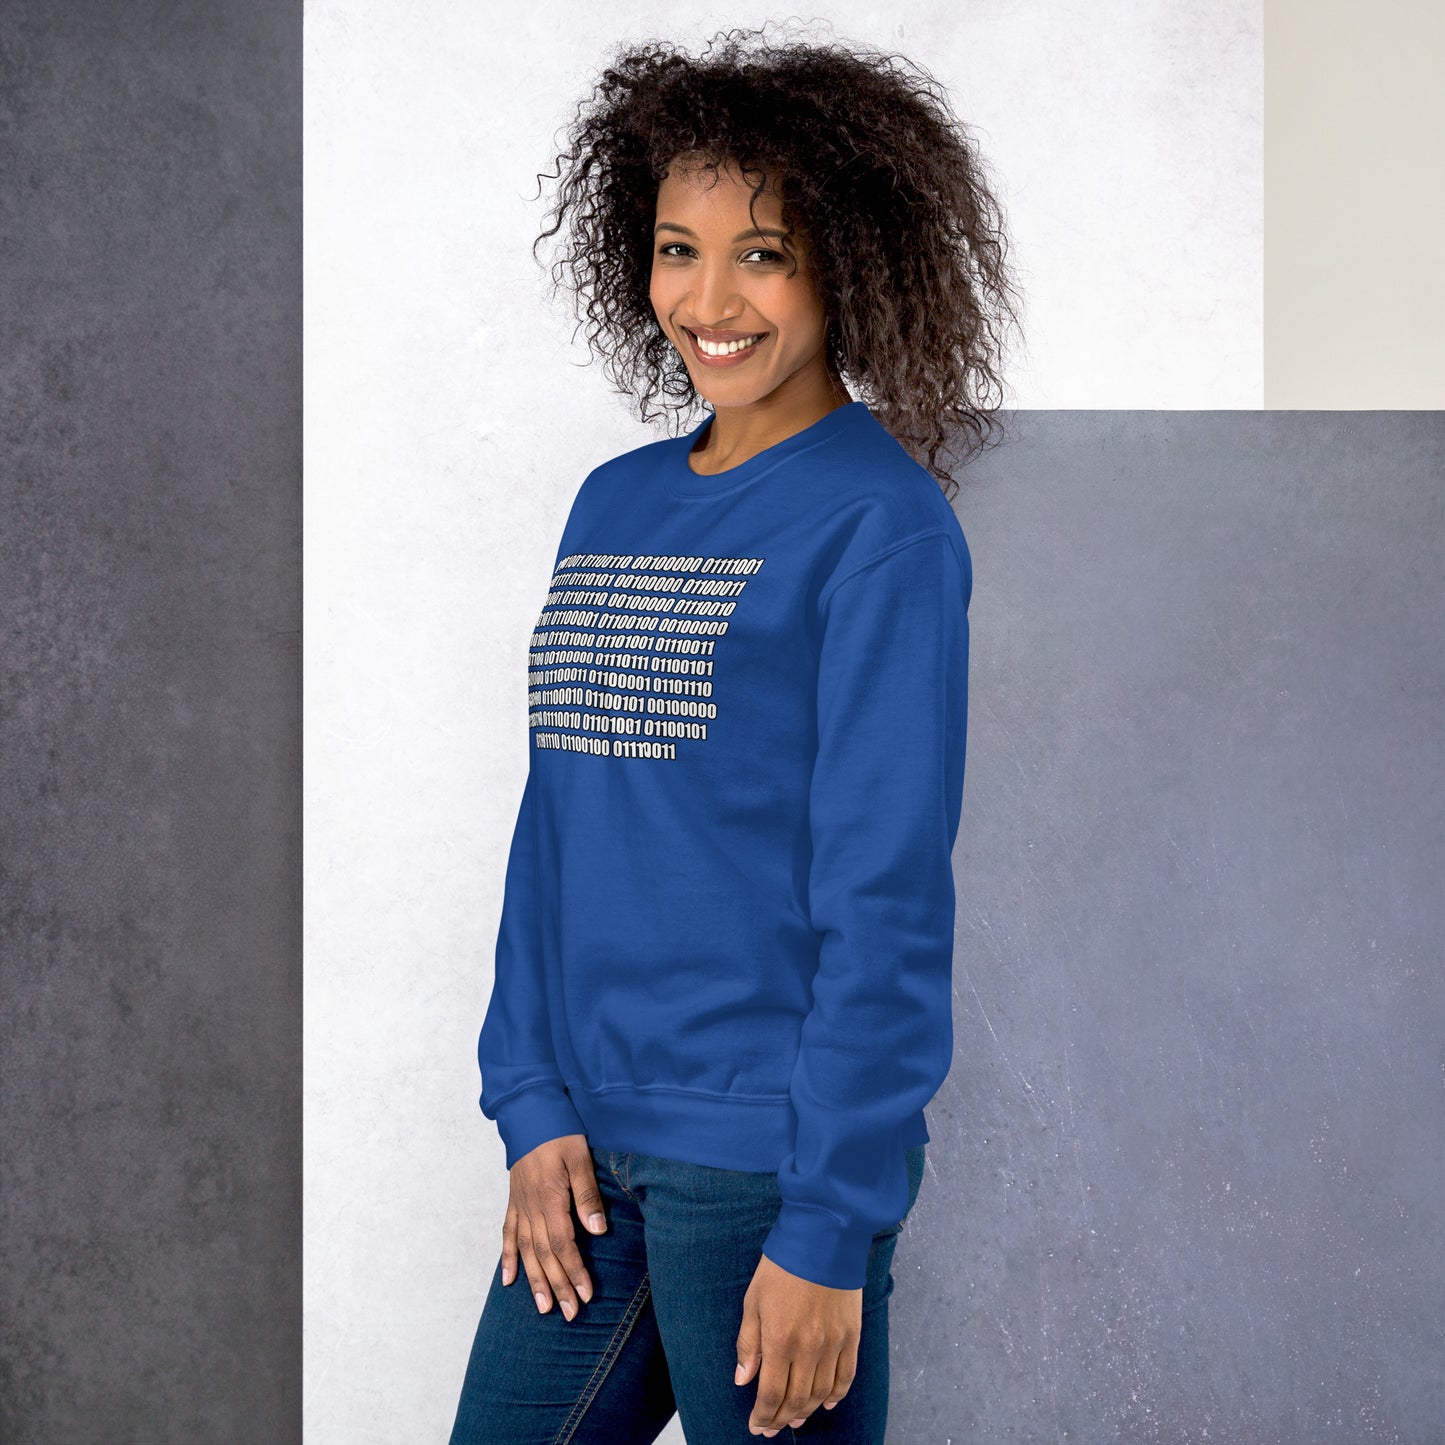 Women with royal blue sweatshirt with binaire text "If you can read this"